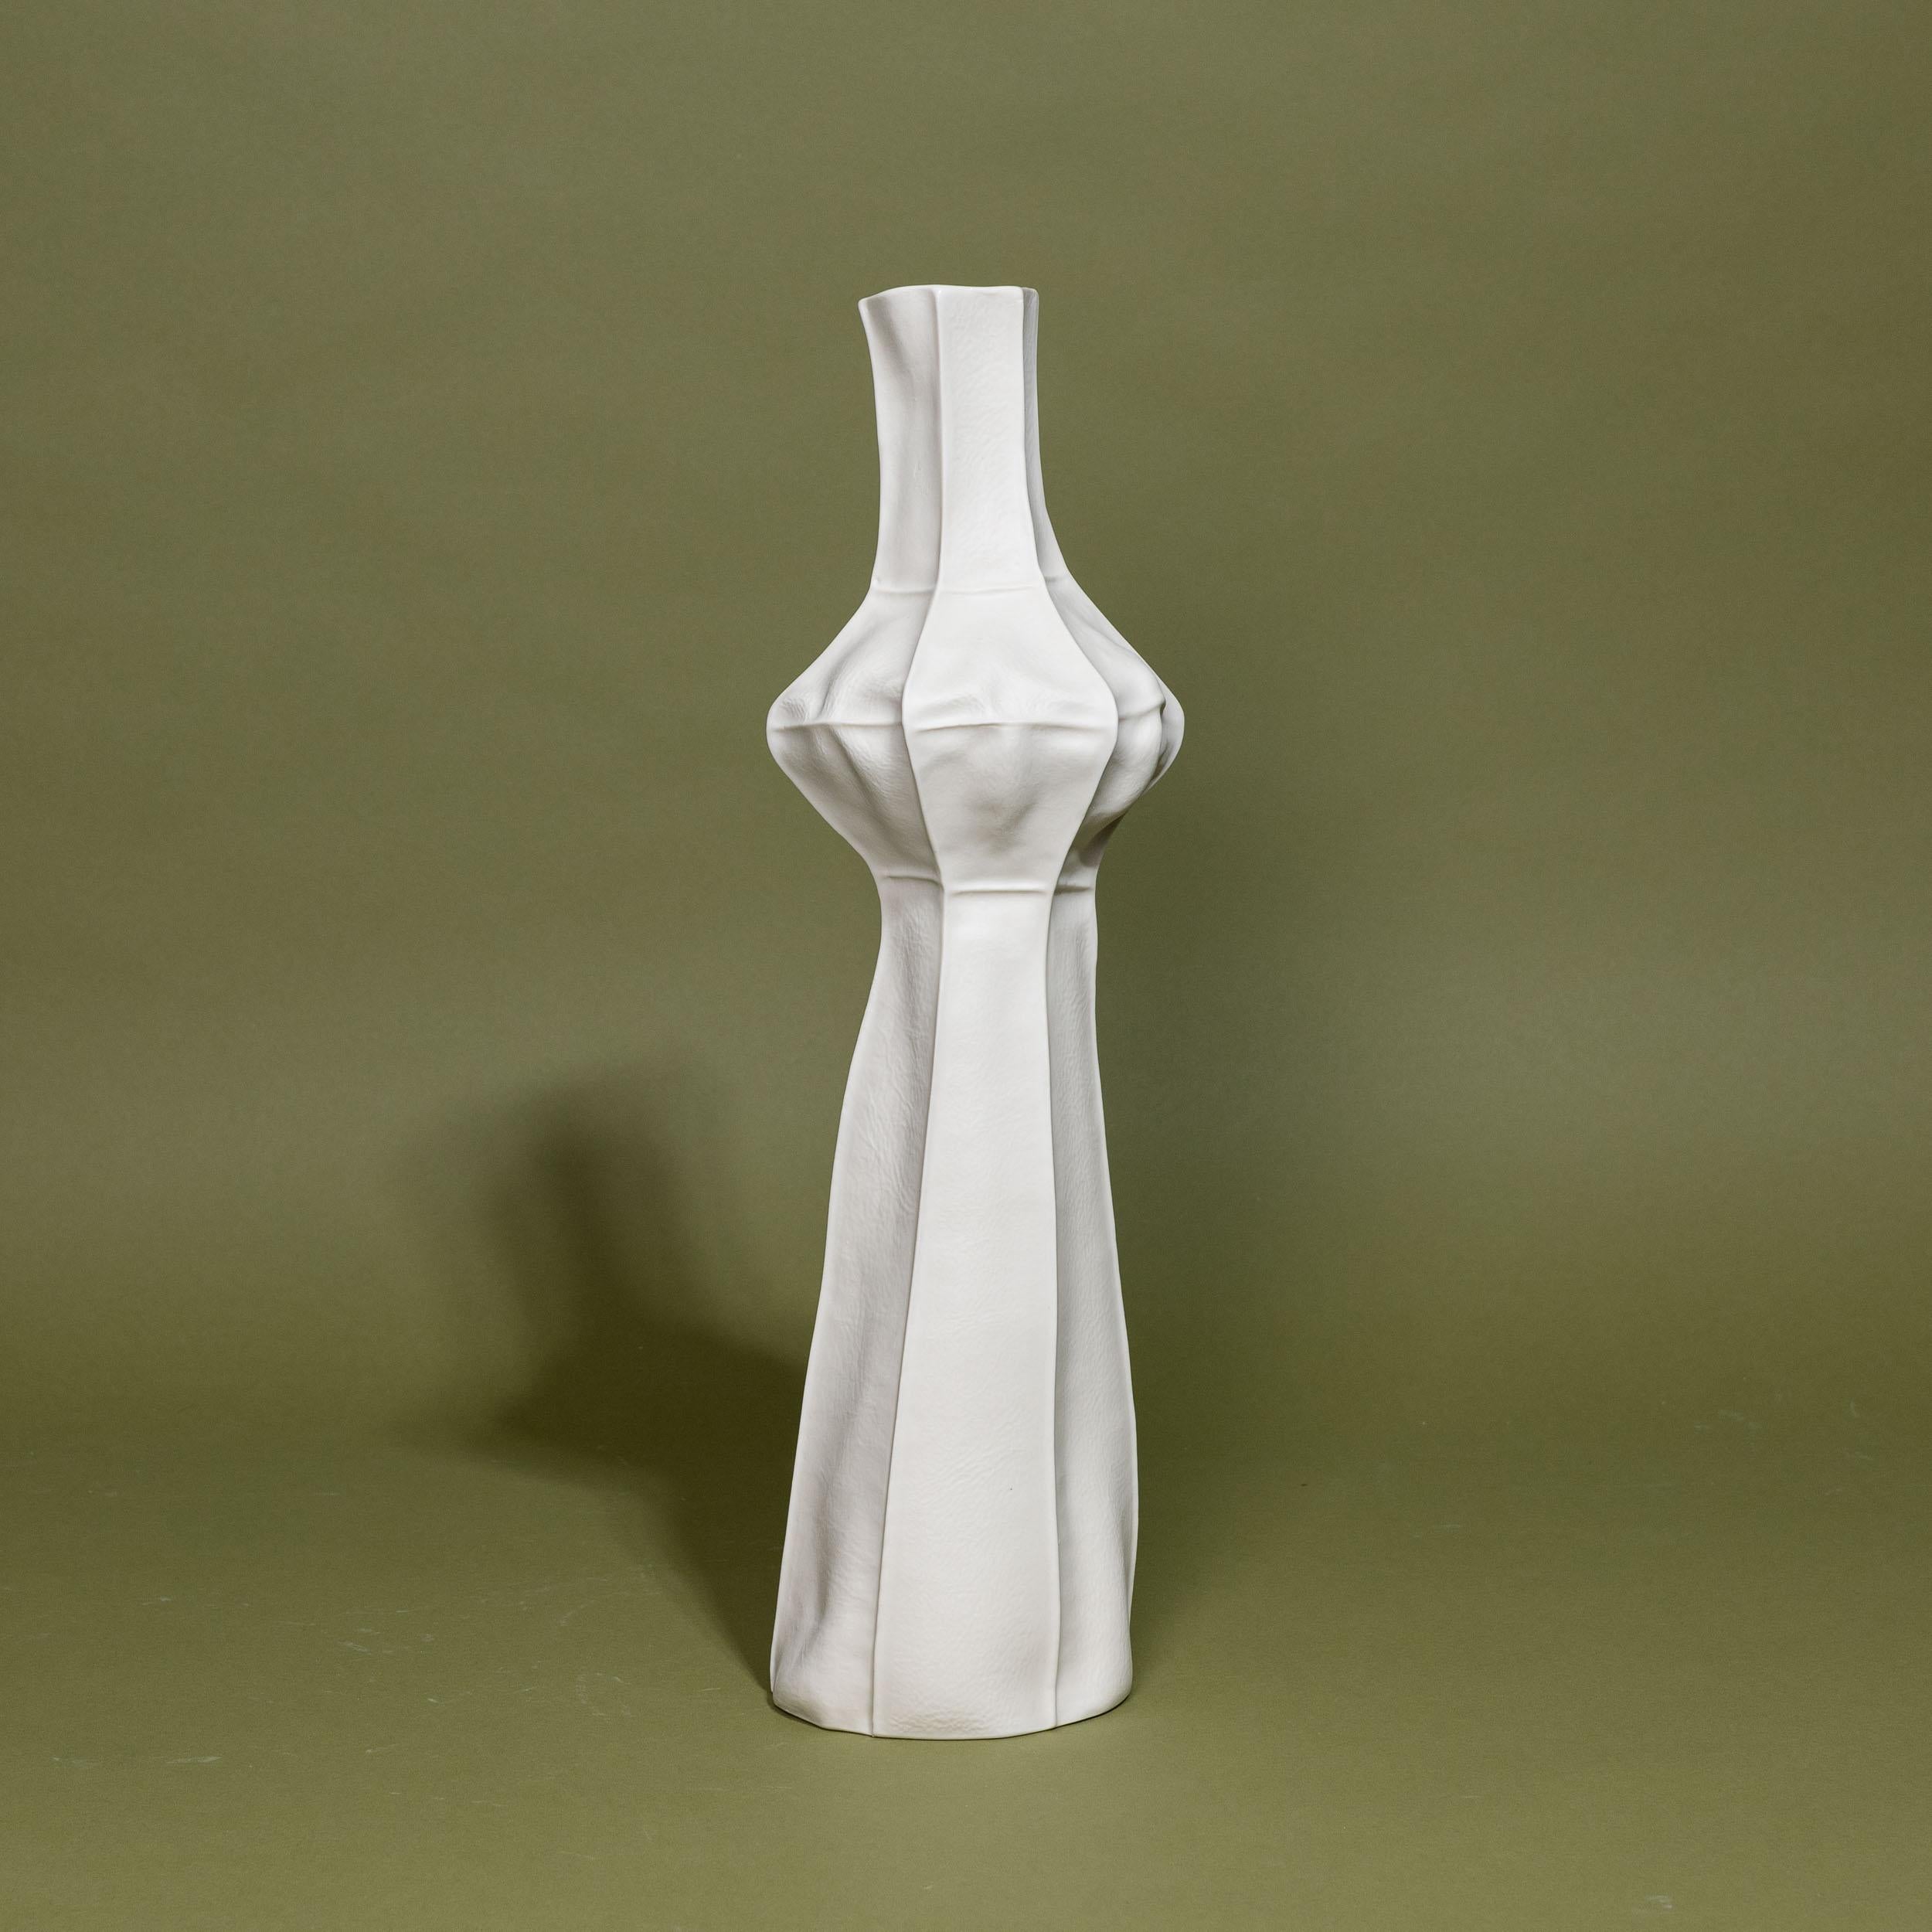 Contemporary Pair of Sculptural White Ceramic Kawa Vases, by Luft Tanaka, organic, porcelain For Sale